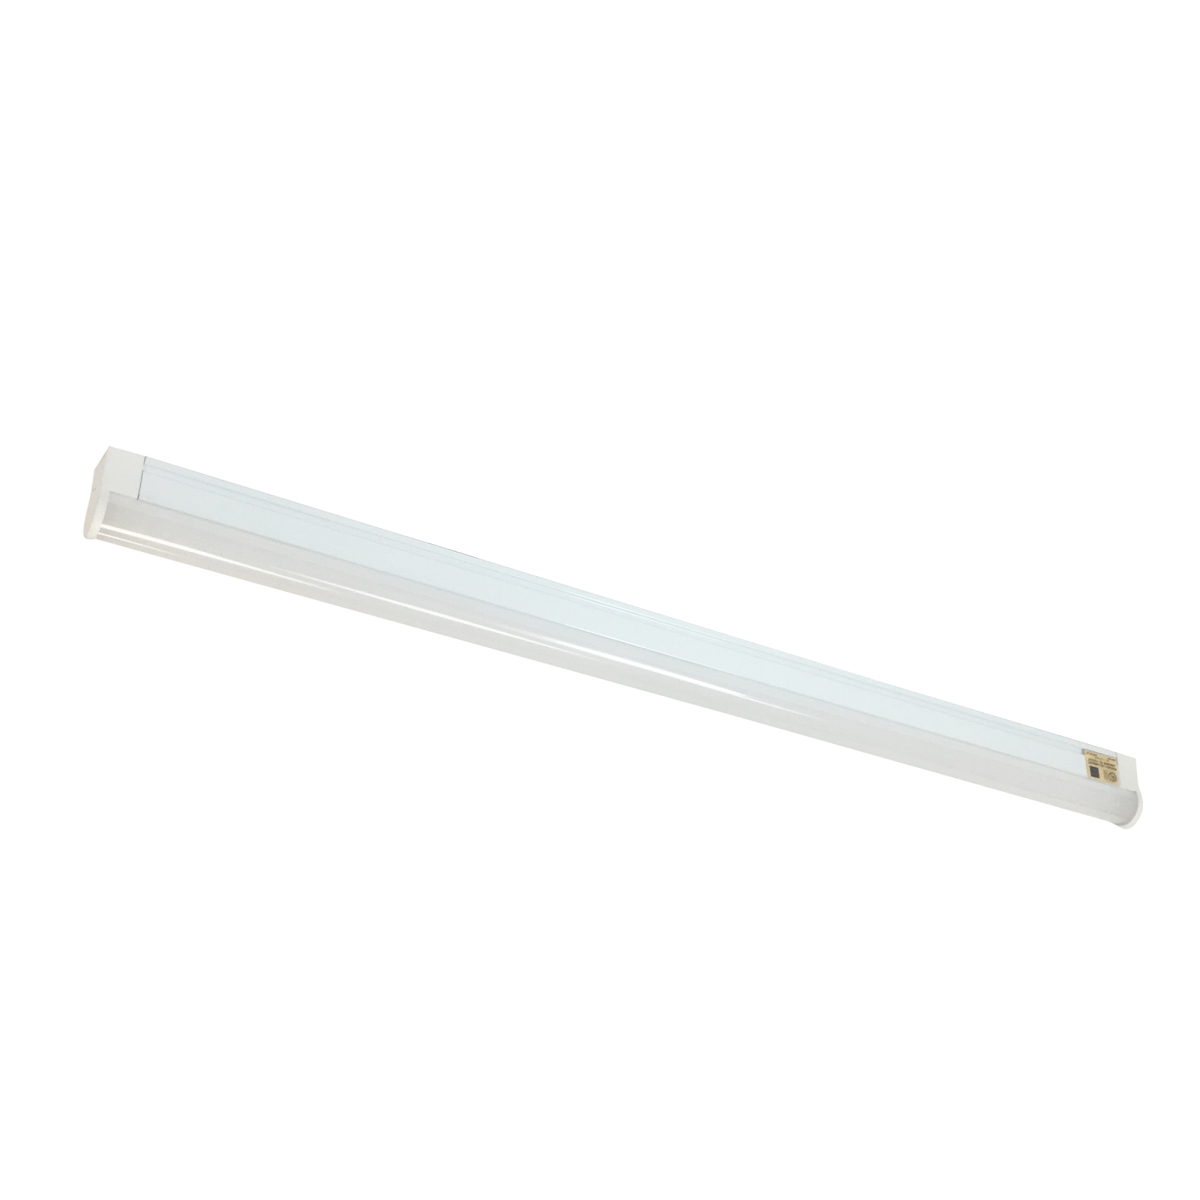 Picture of Nora Lighting NULS-LED4530W 45 in. 3000K Undercabinet Linear LED Fixture - White